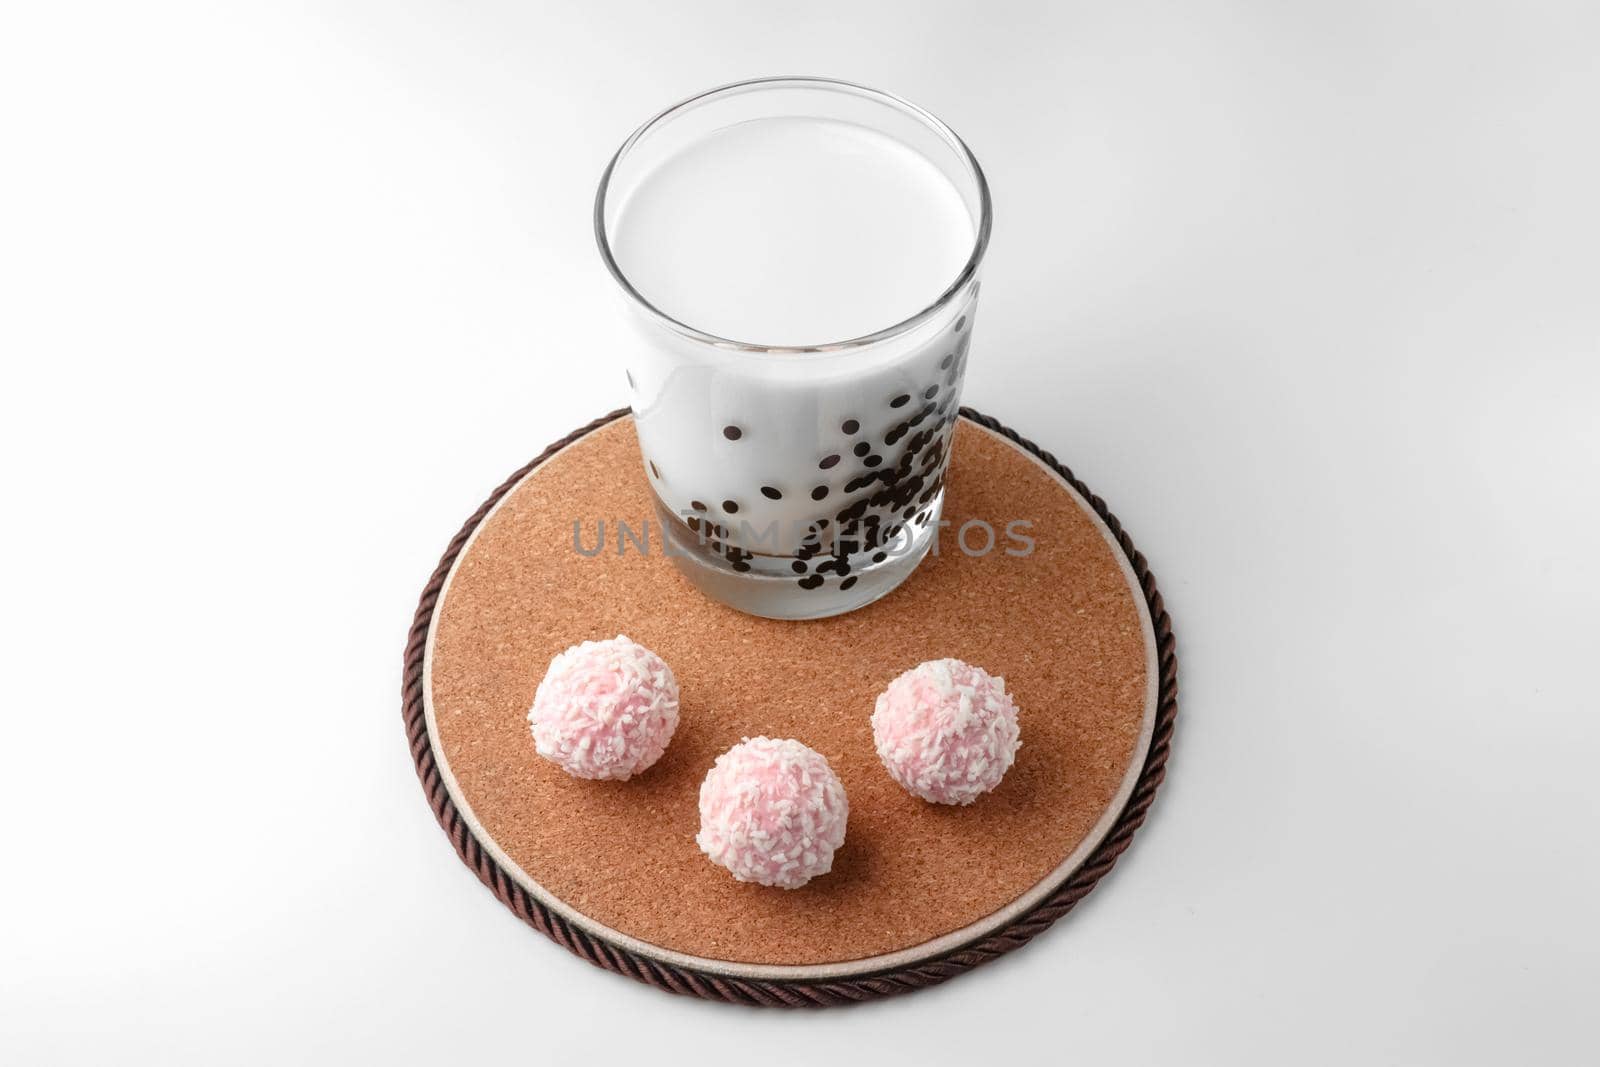 pink chocolate candy and a glass of milk on a white background. candy ball macro. isolate. High quality photo